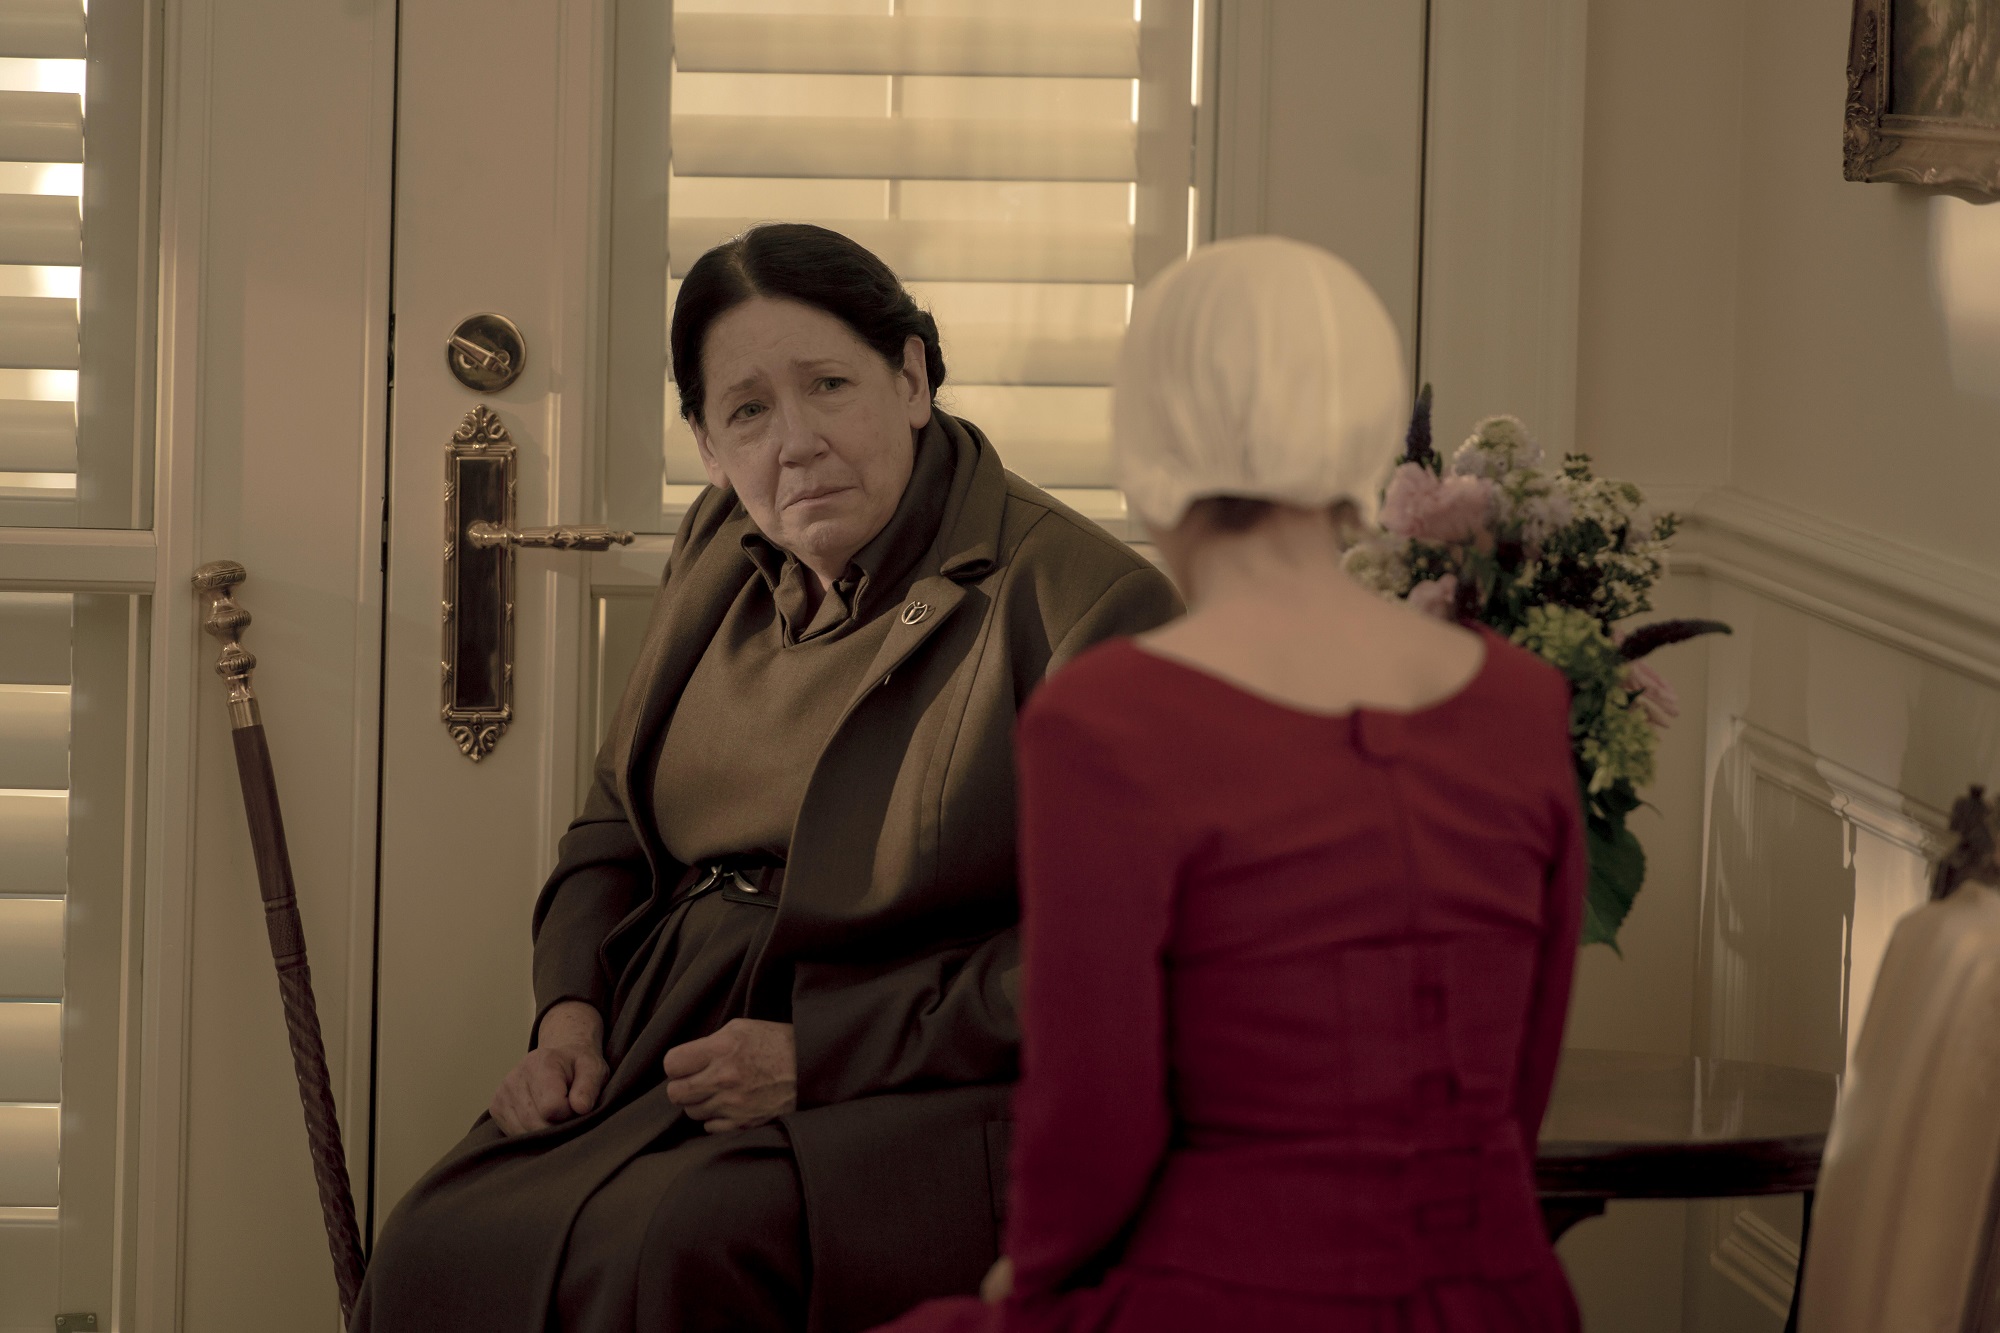 Aunt Lydia and Janine sit together in season 3 of 'The Handmaid's Tale'